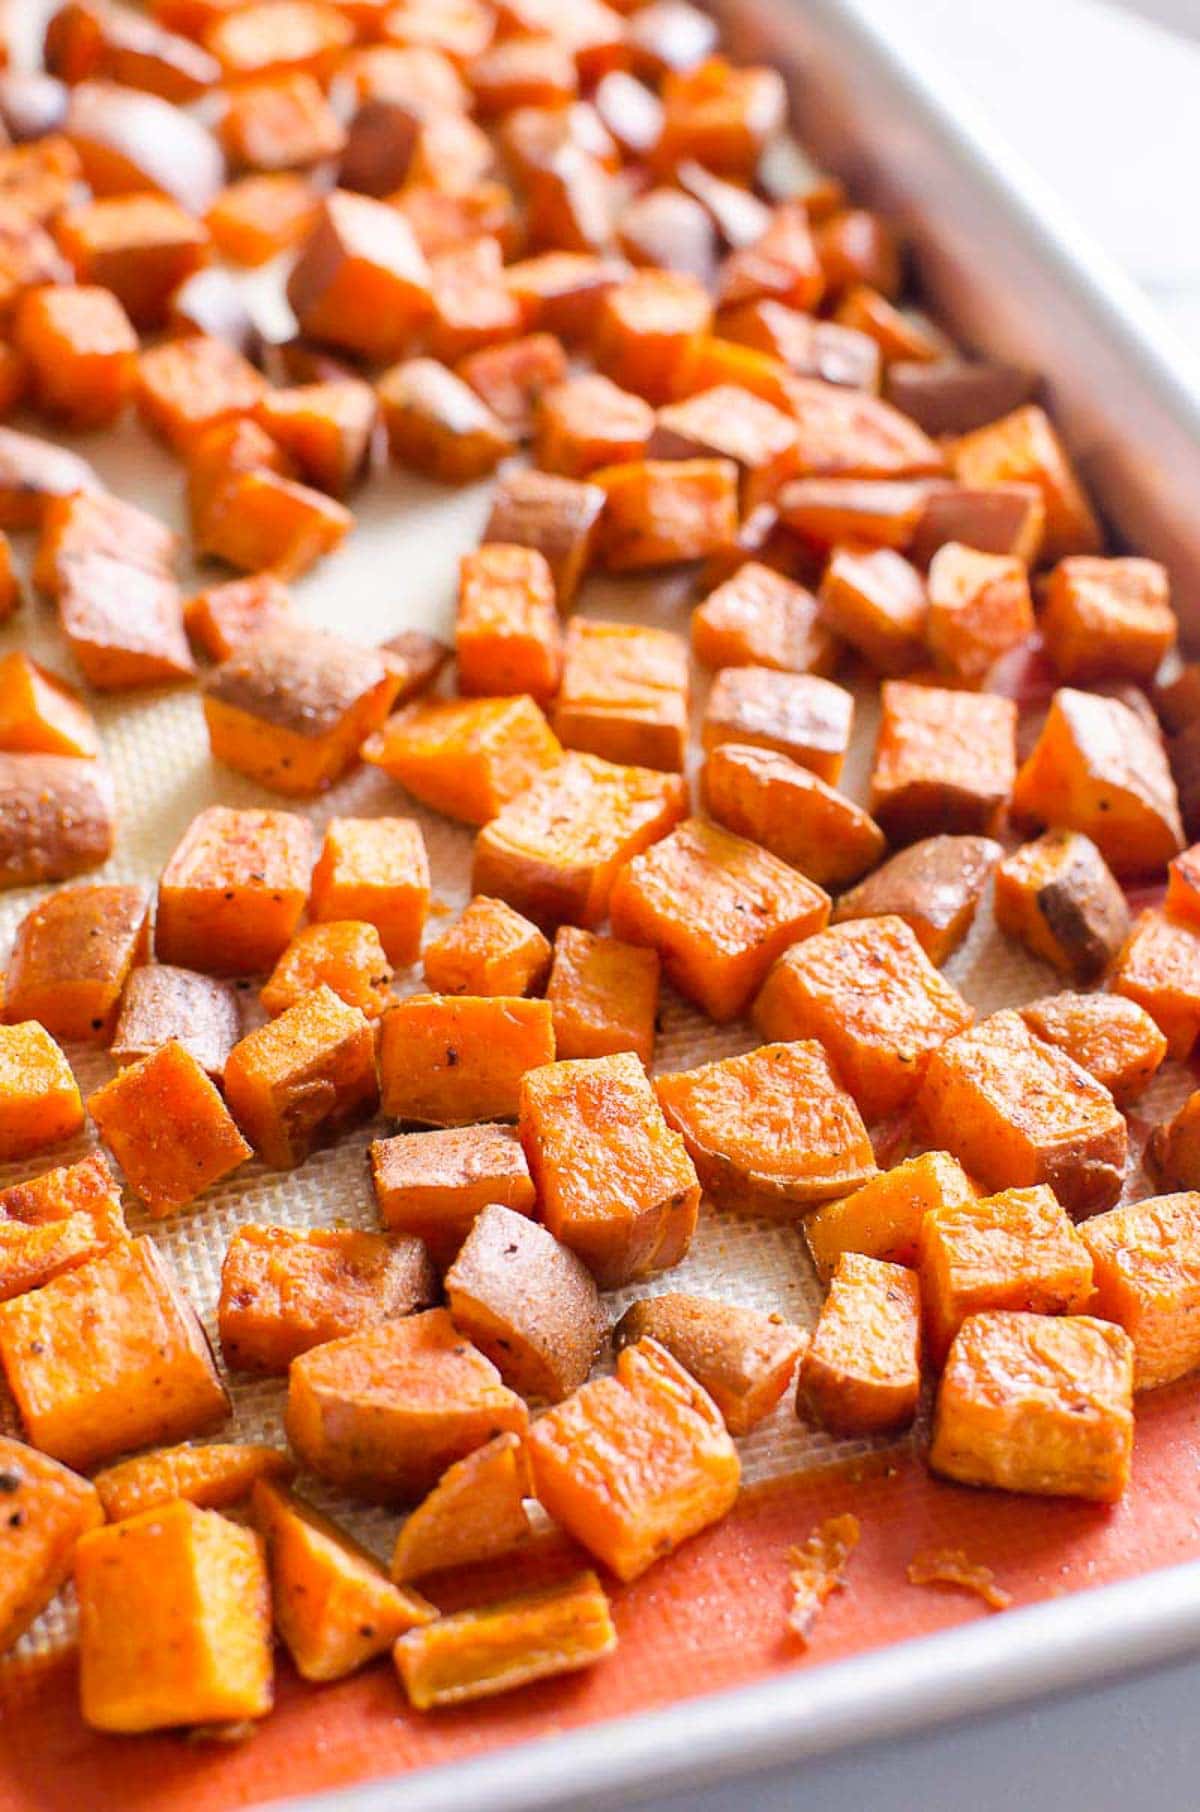 Healthy oven roasted sweet potatoes on silicone lined baking sheet.